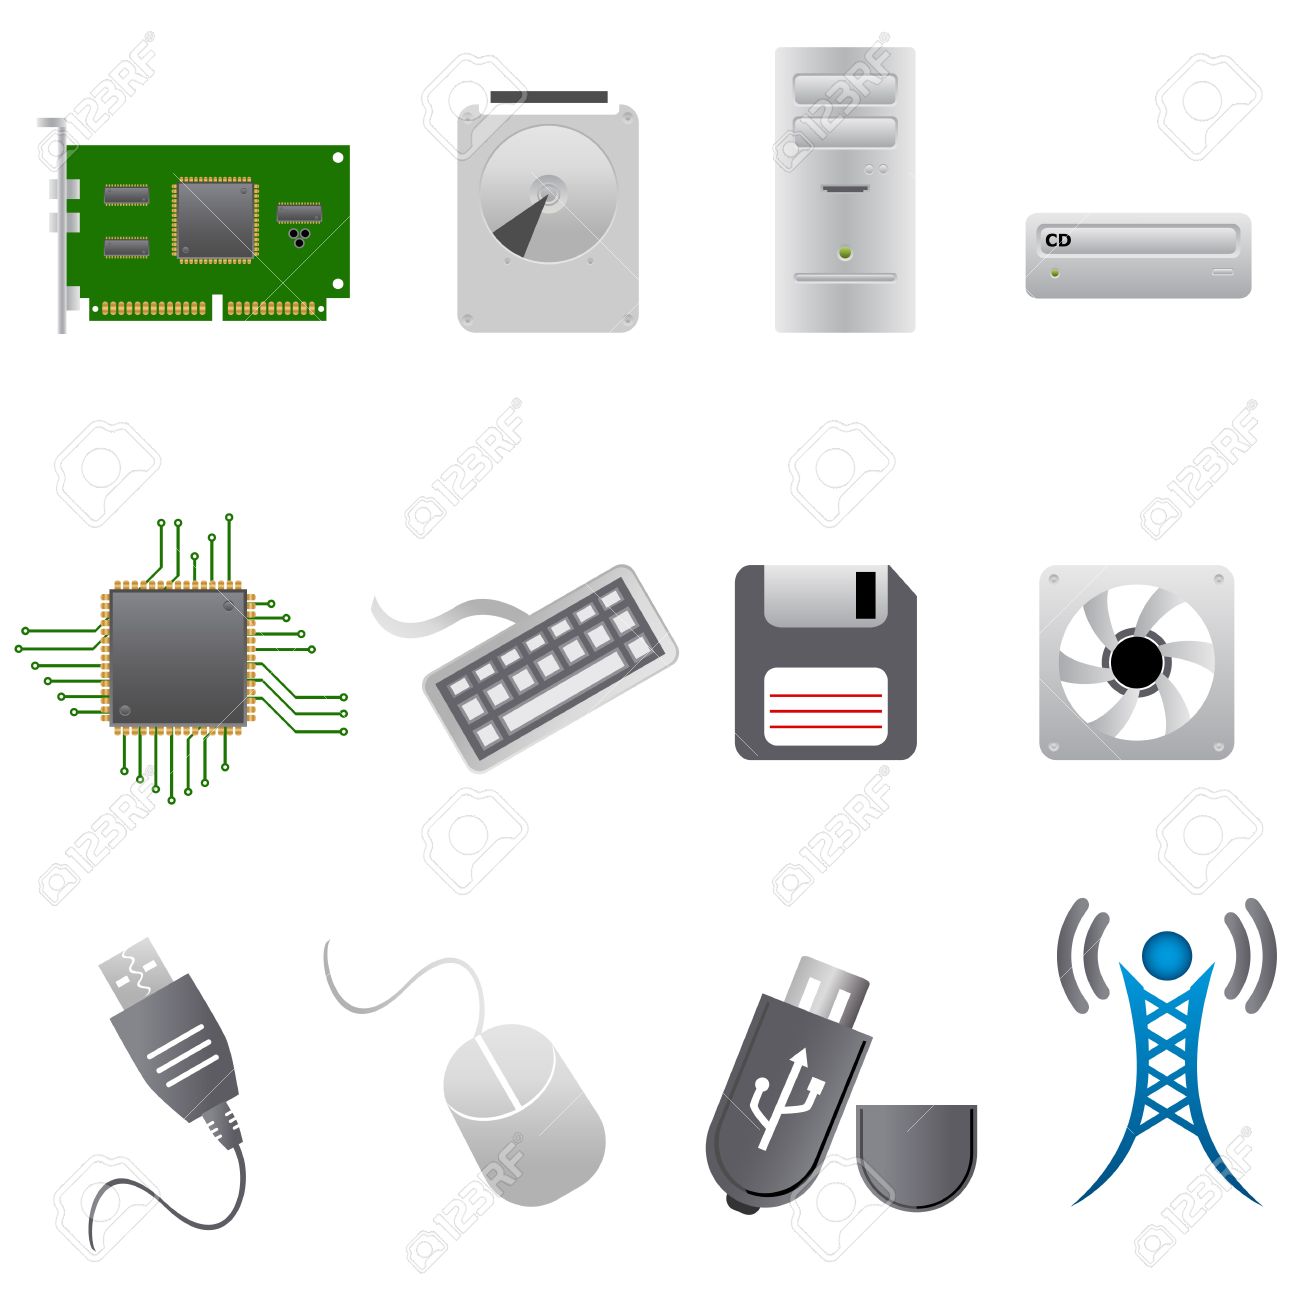 computer hardware clipart free - photo #7